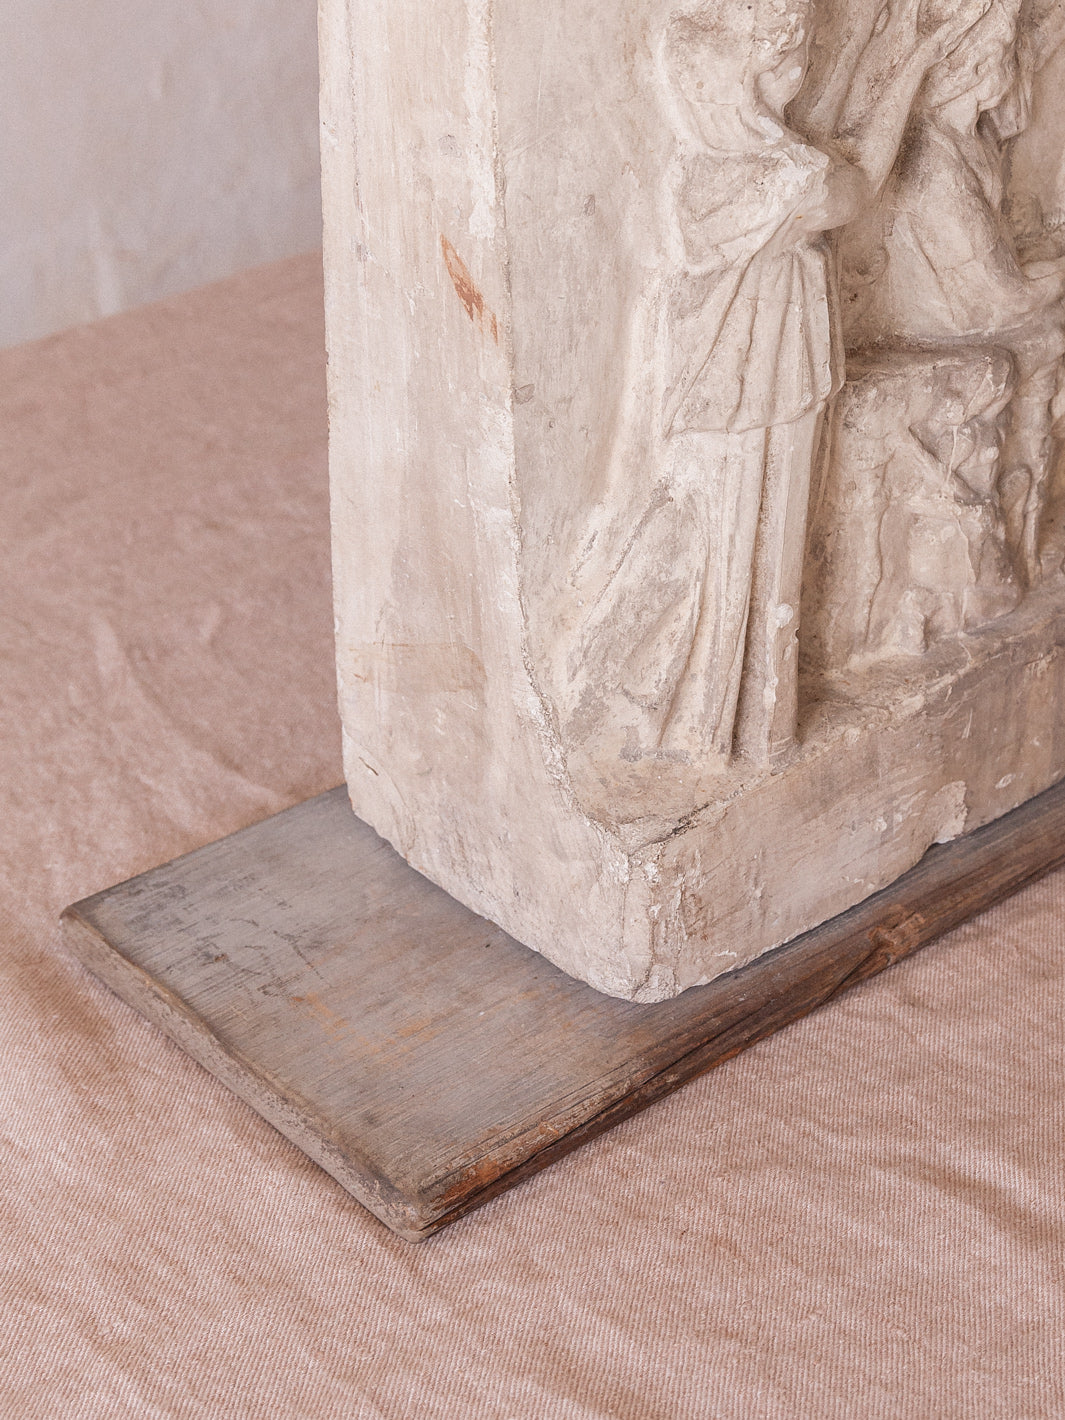 Low relief plaster sculptured with a mold à Ban Creux s.XVIII